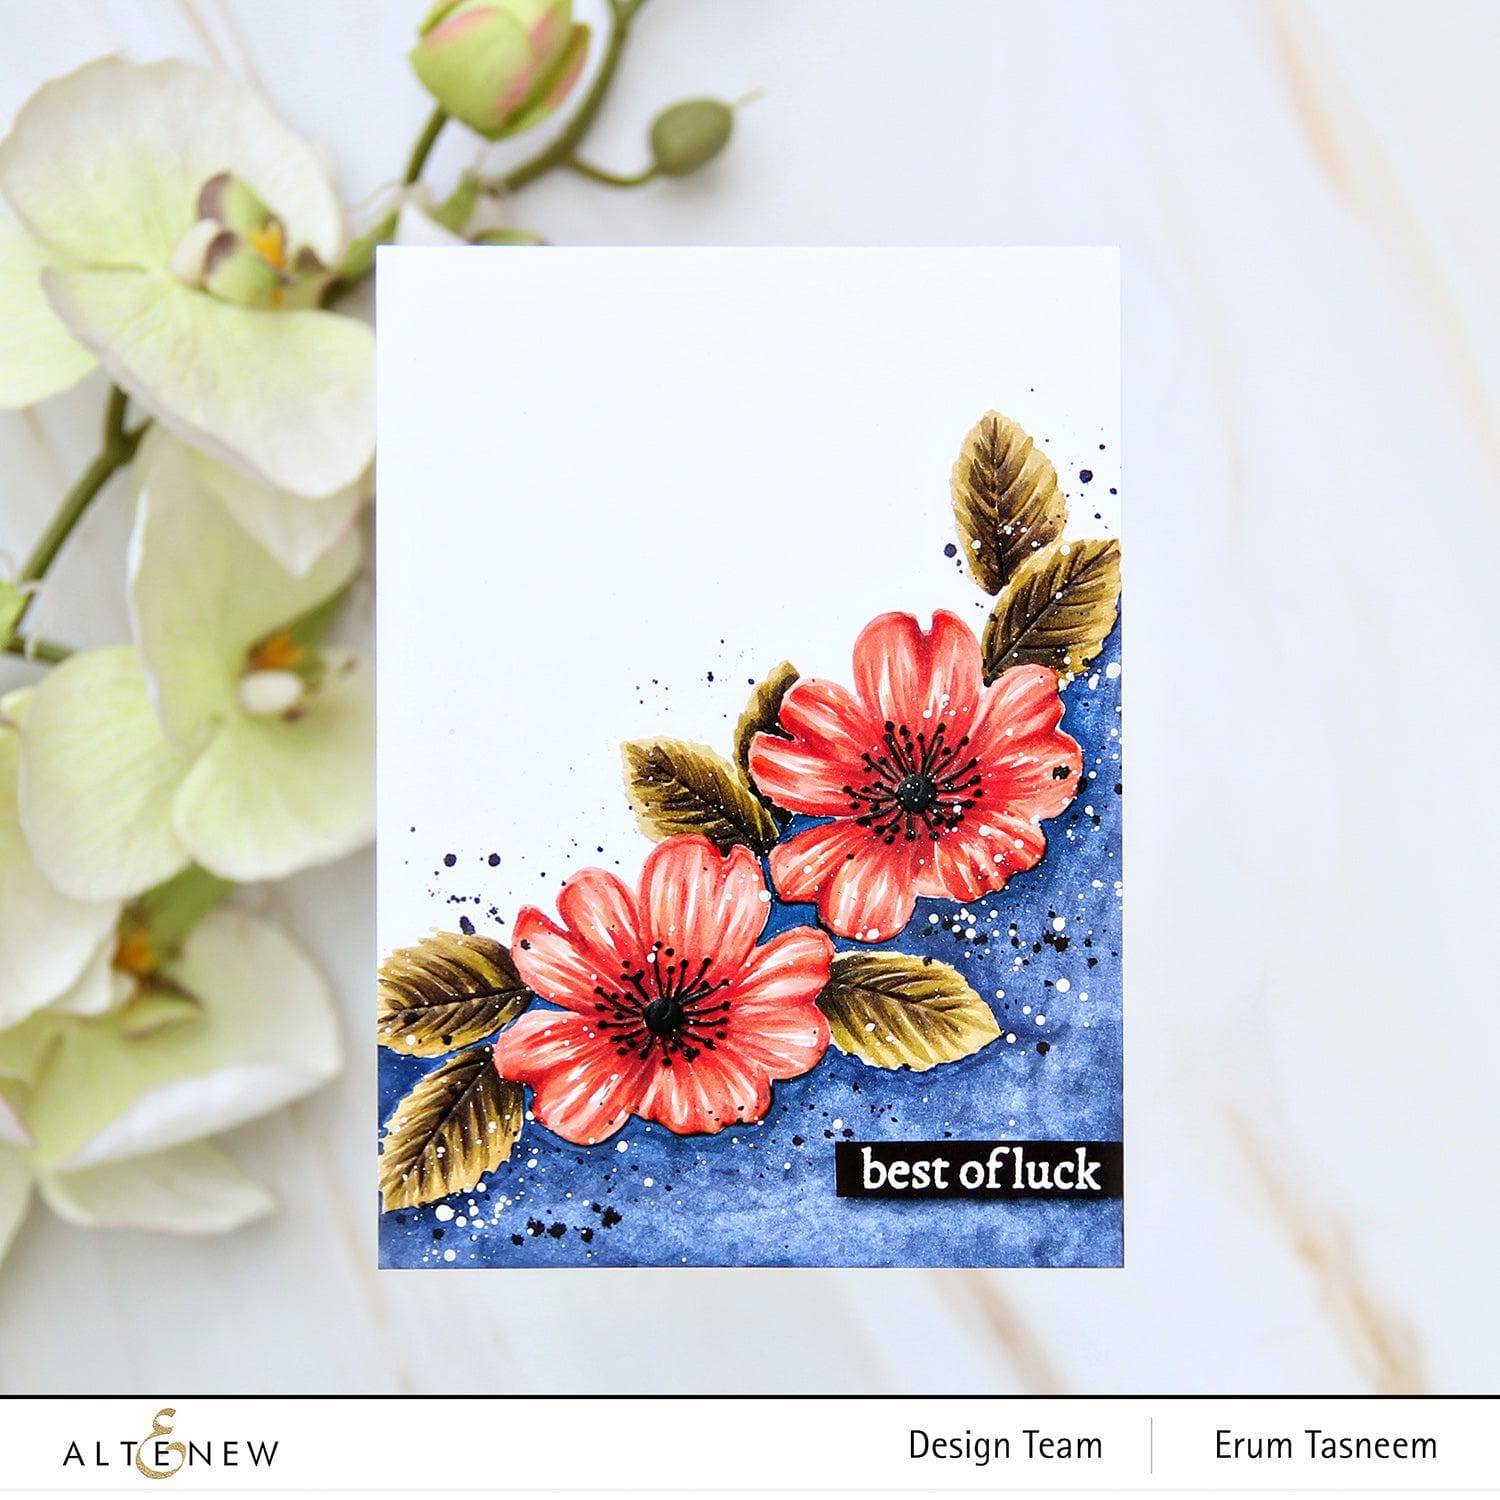 Creative Paper Craft Projects to Do With Alcohol Markers – Altenew